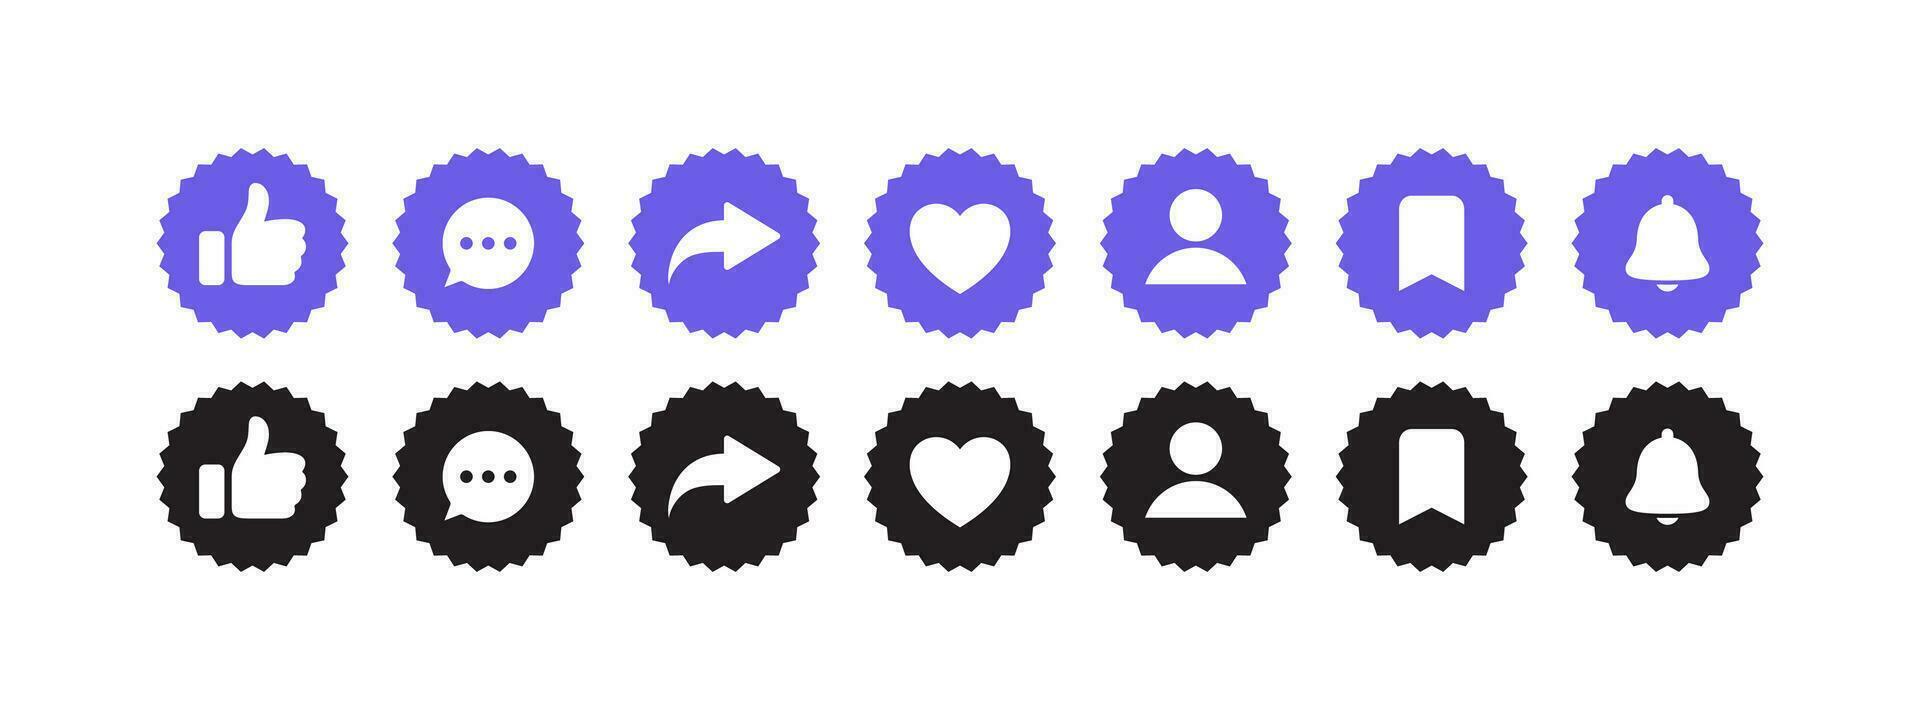 Like, comment, share, repost icons. Social media interface icons. Vector scalable graphics